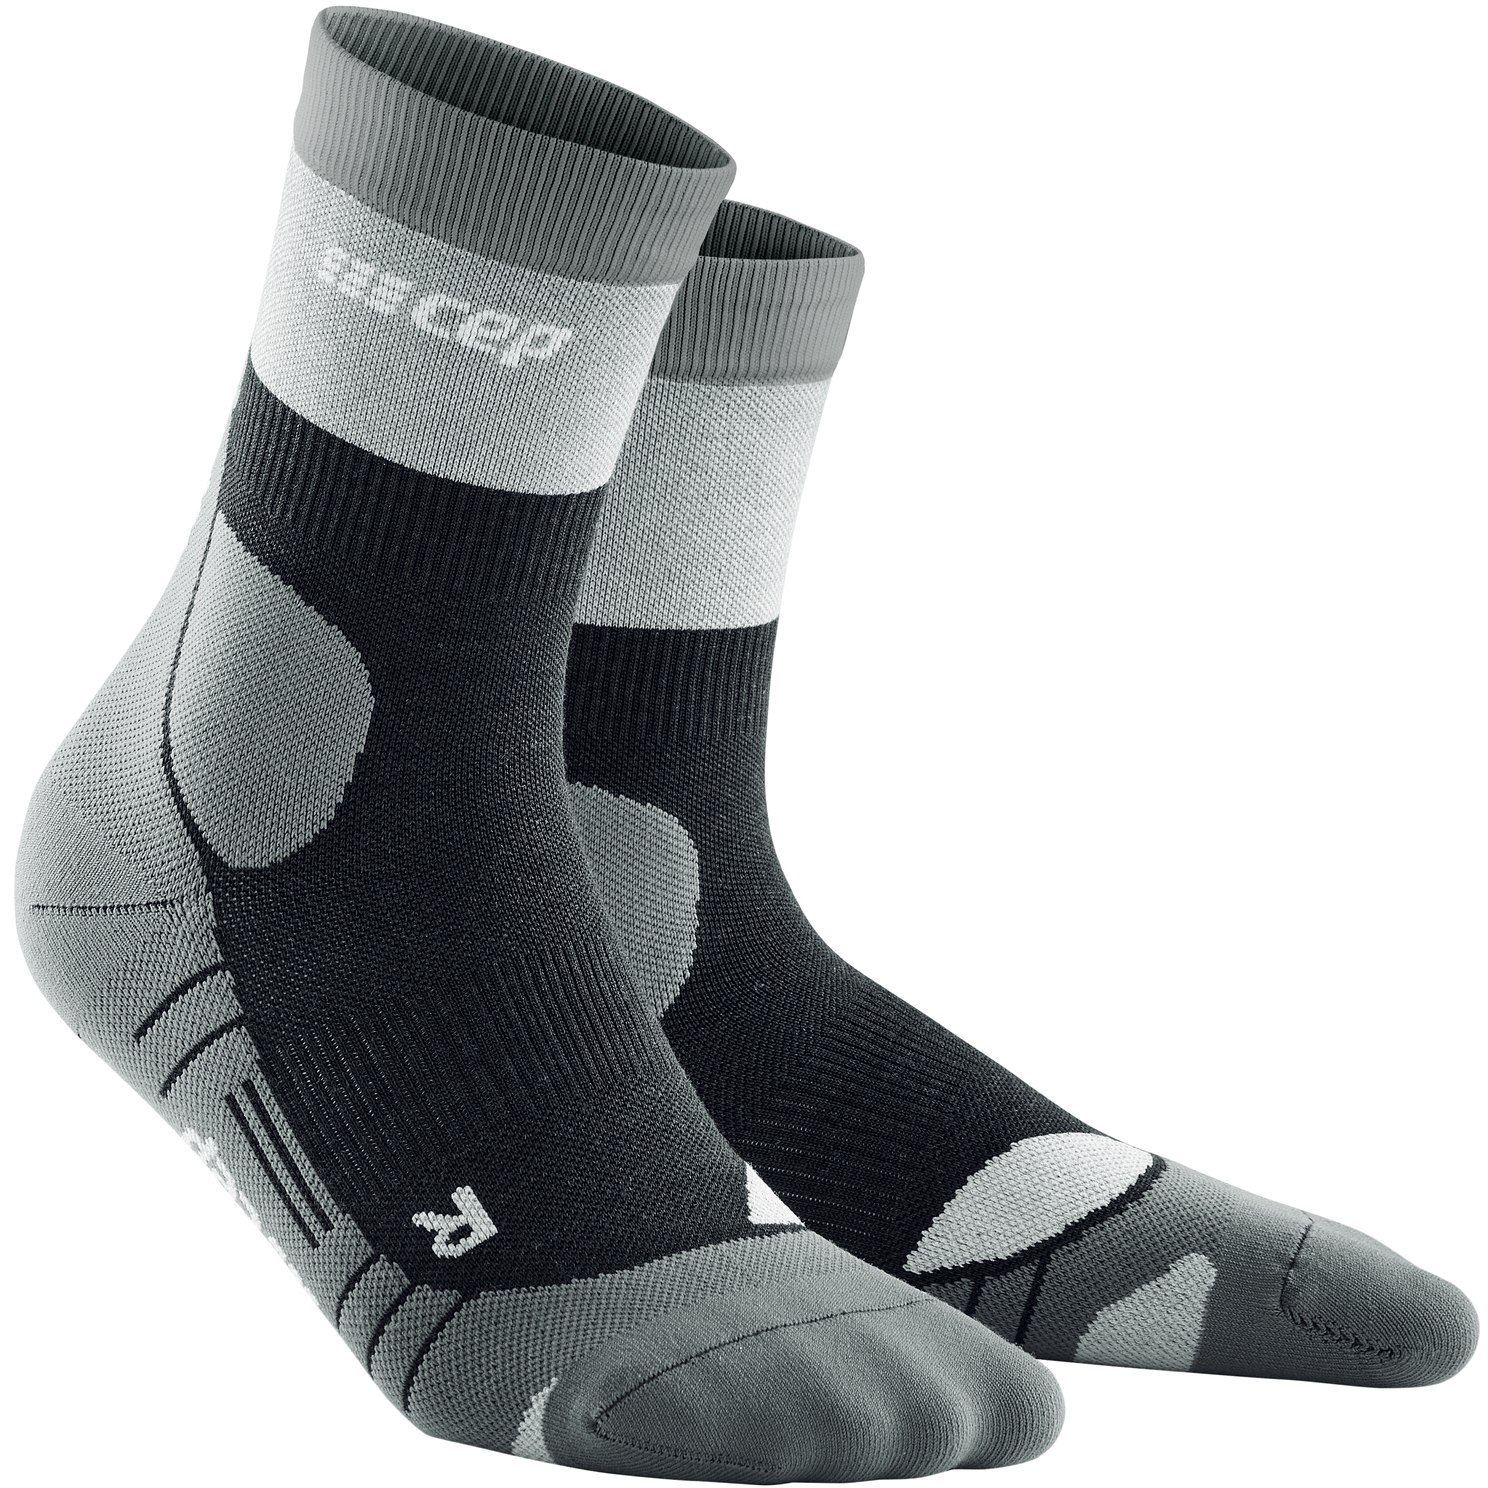 Picture of CEP Hiking Light Merino Mid Cut Compression Socks - stonegrey/grey